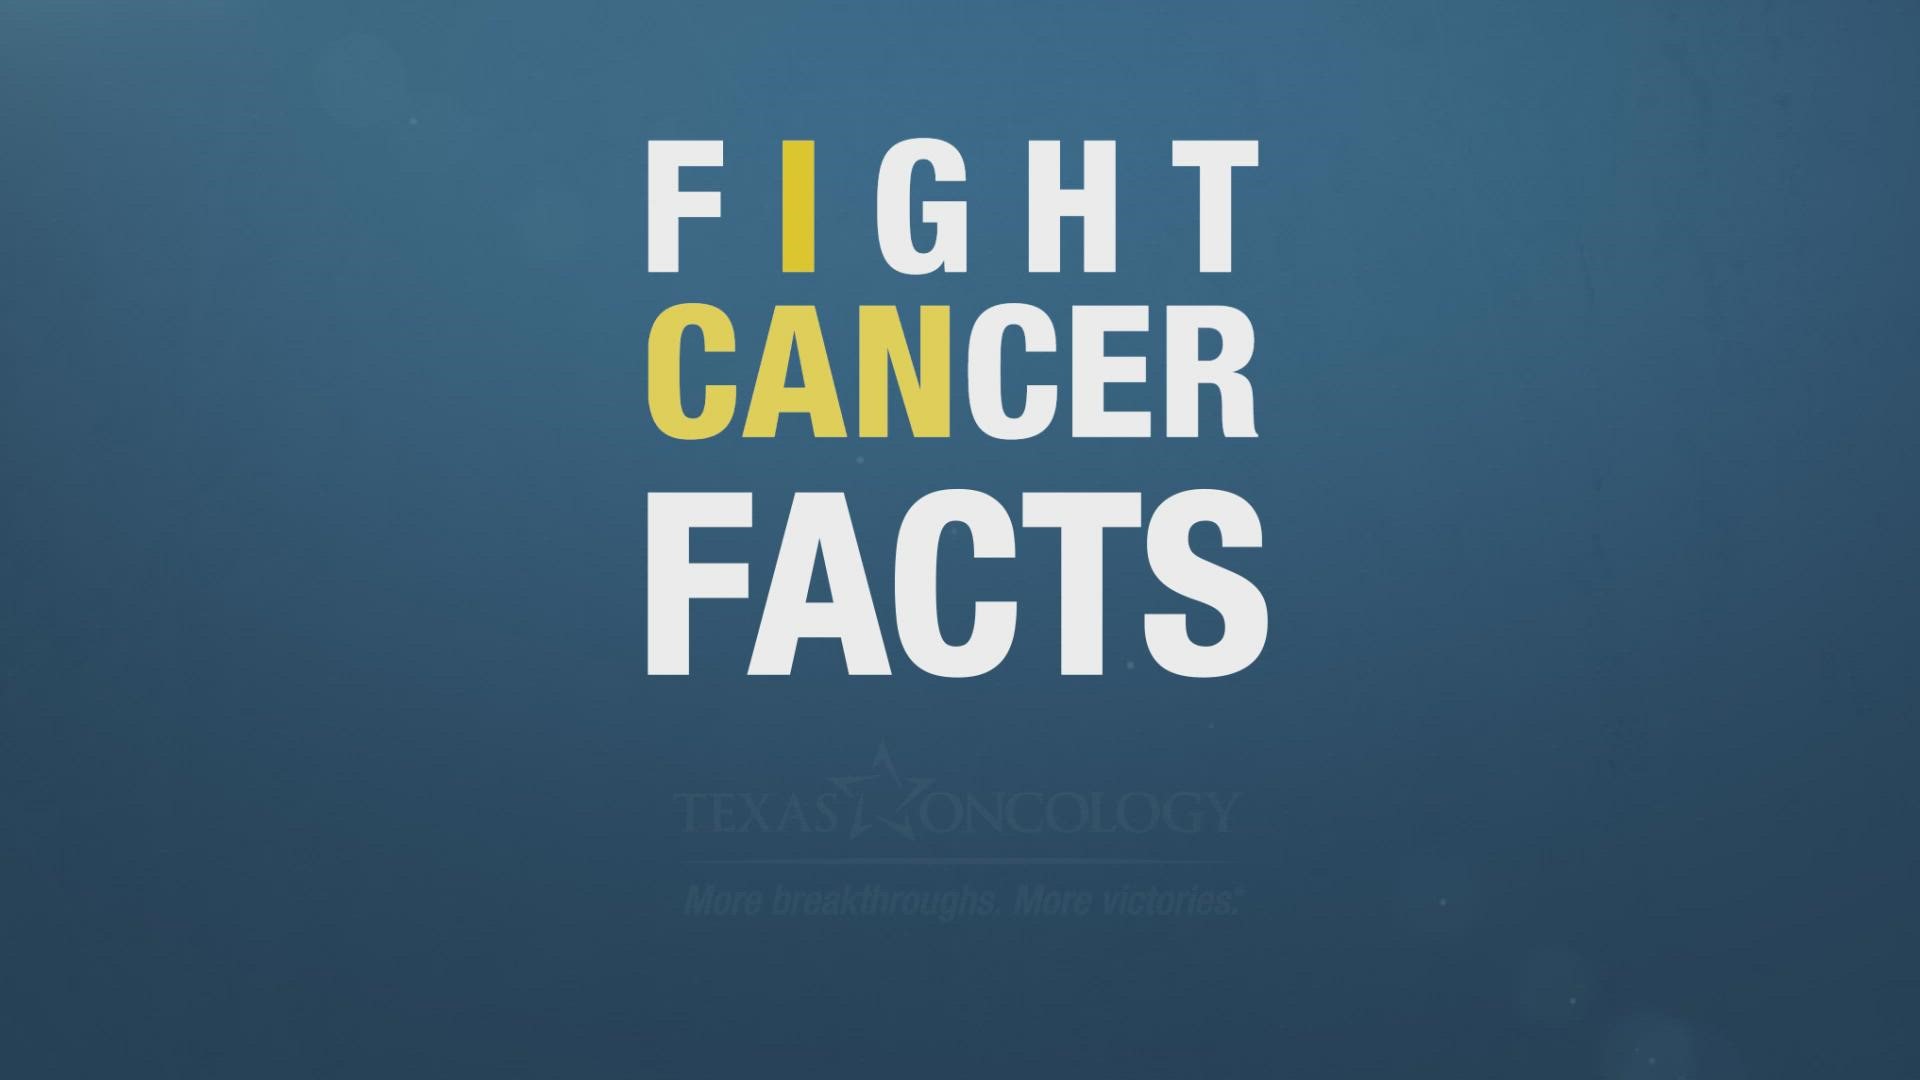 Local Texas Oncology doctor shares what women need to know about gynecologic cancer risk.